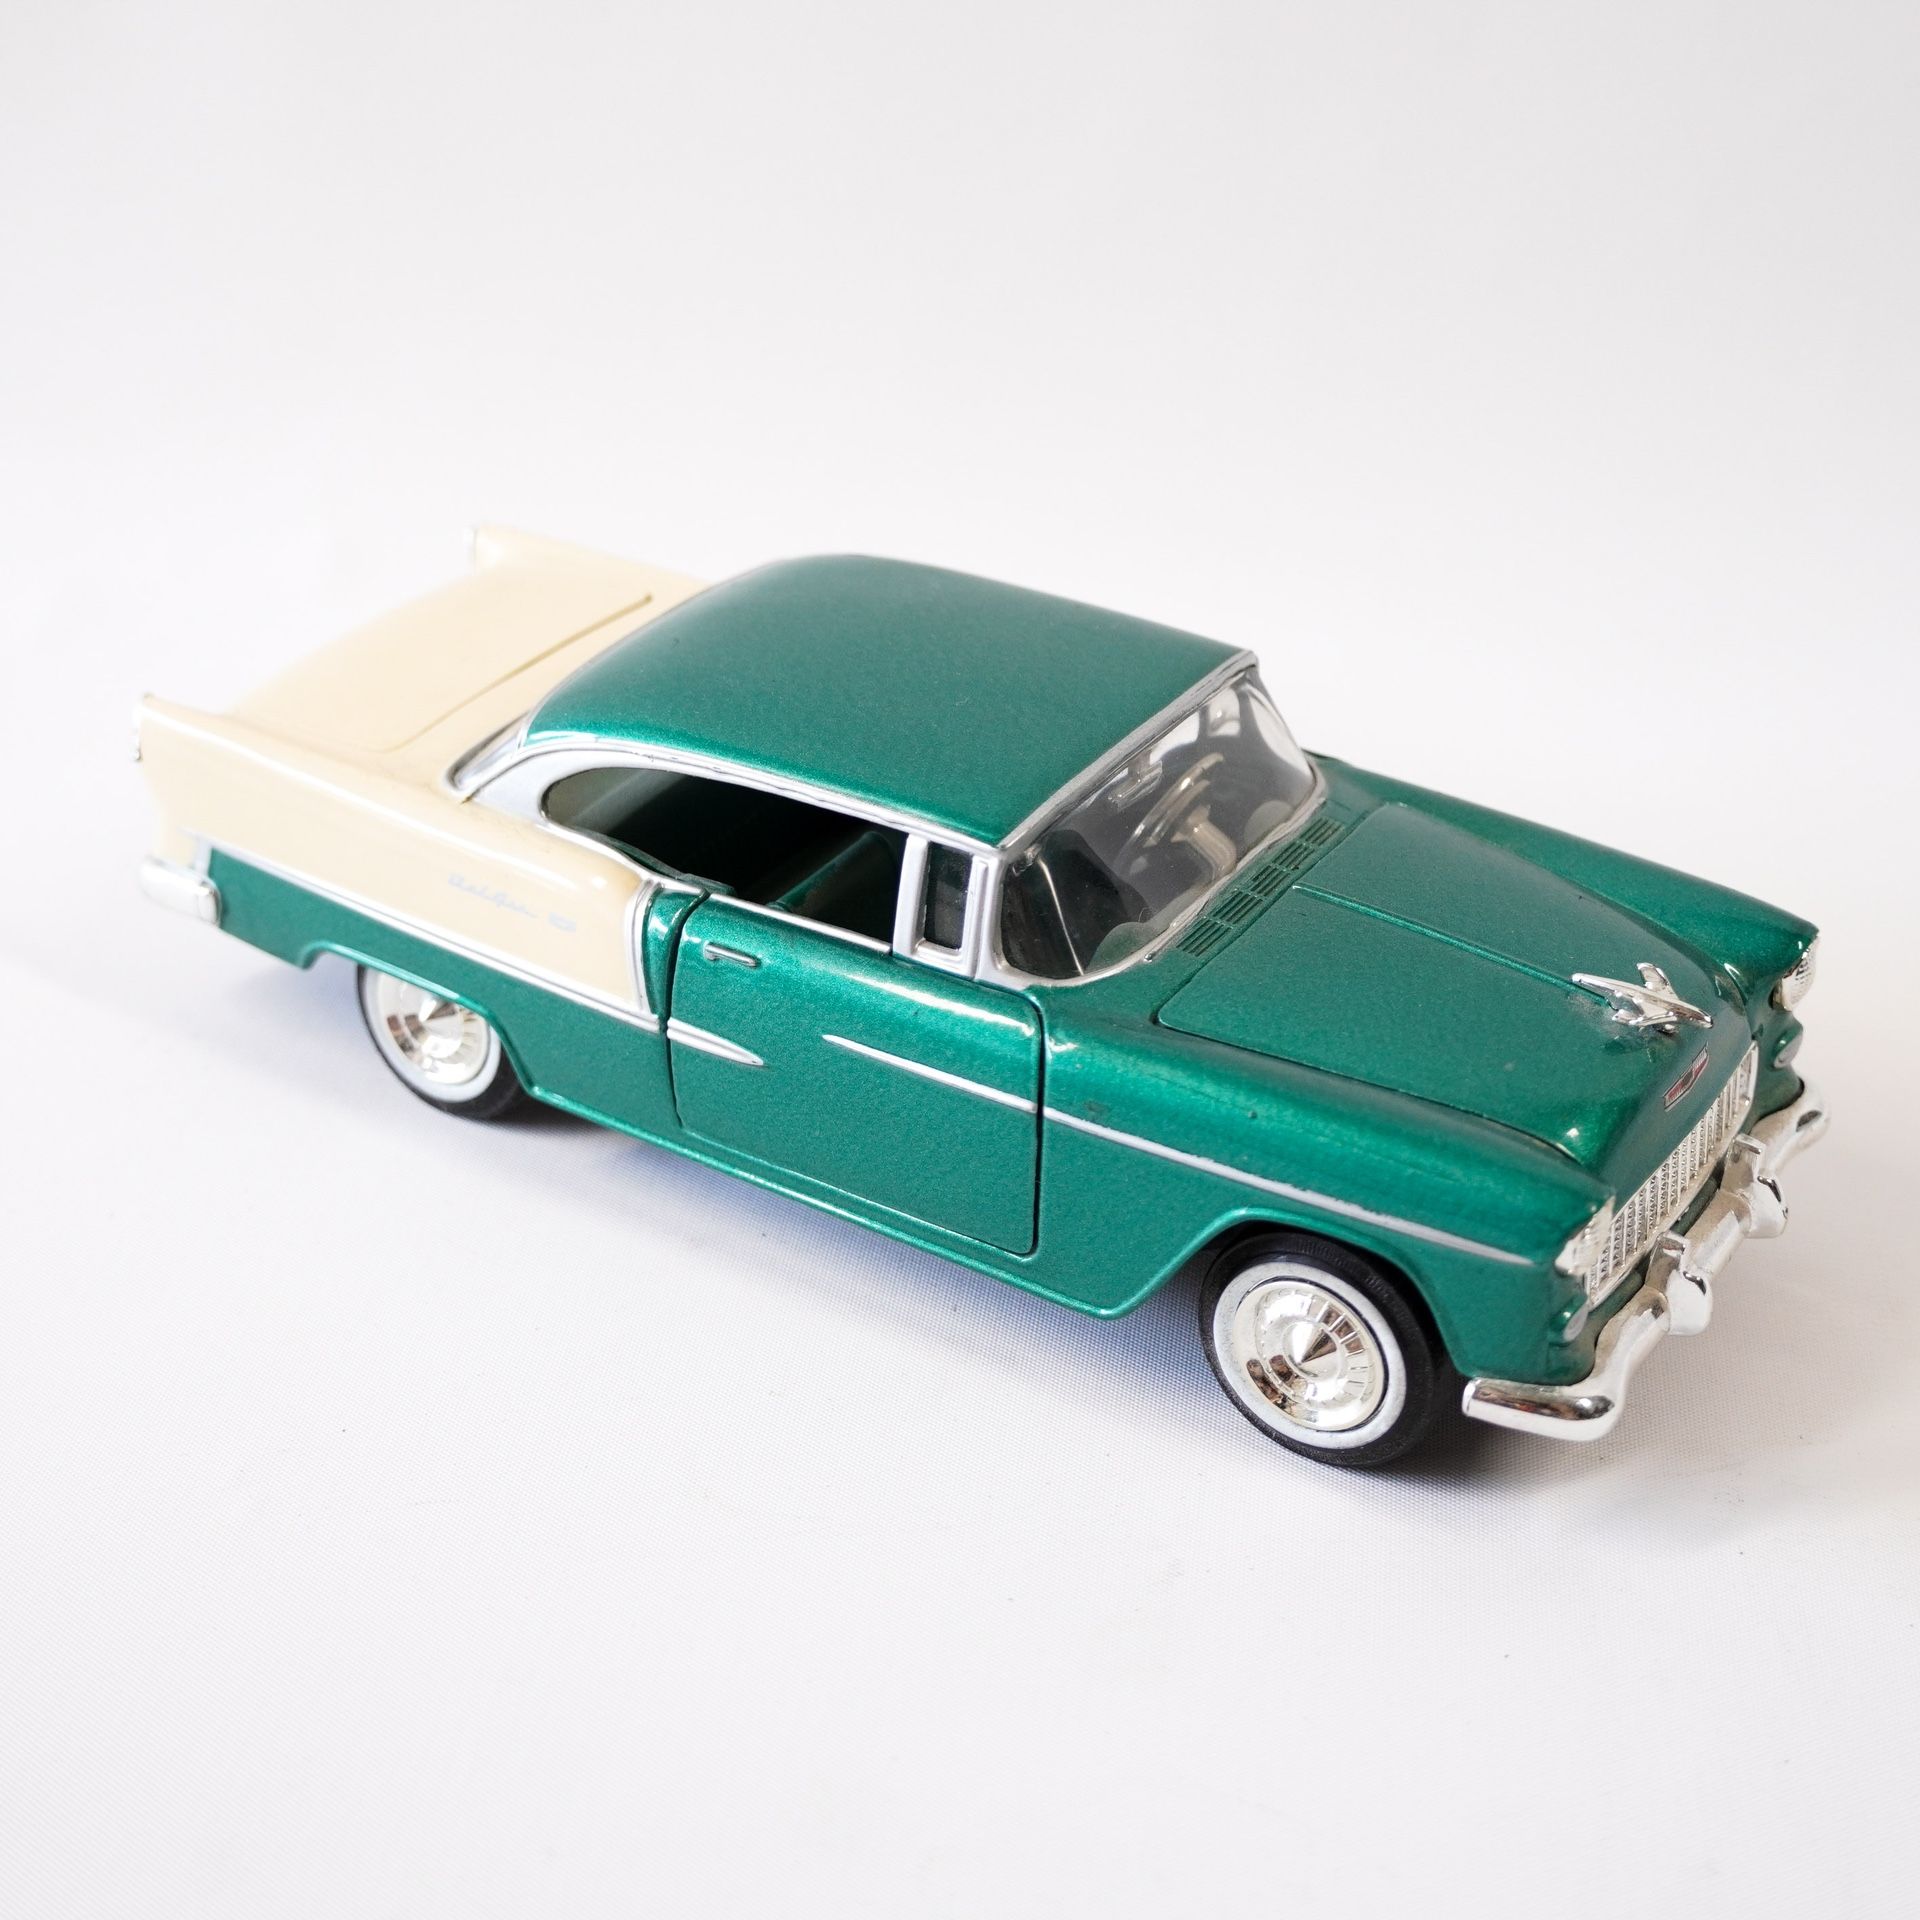 8" 1955 Chevy Bel Air Diecast Model Car Toy Scale 1/24